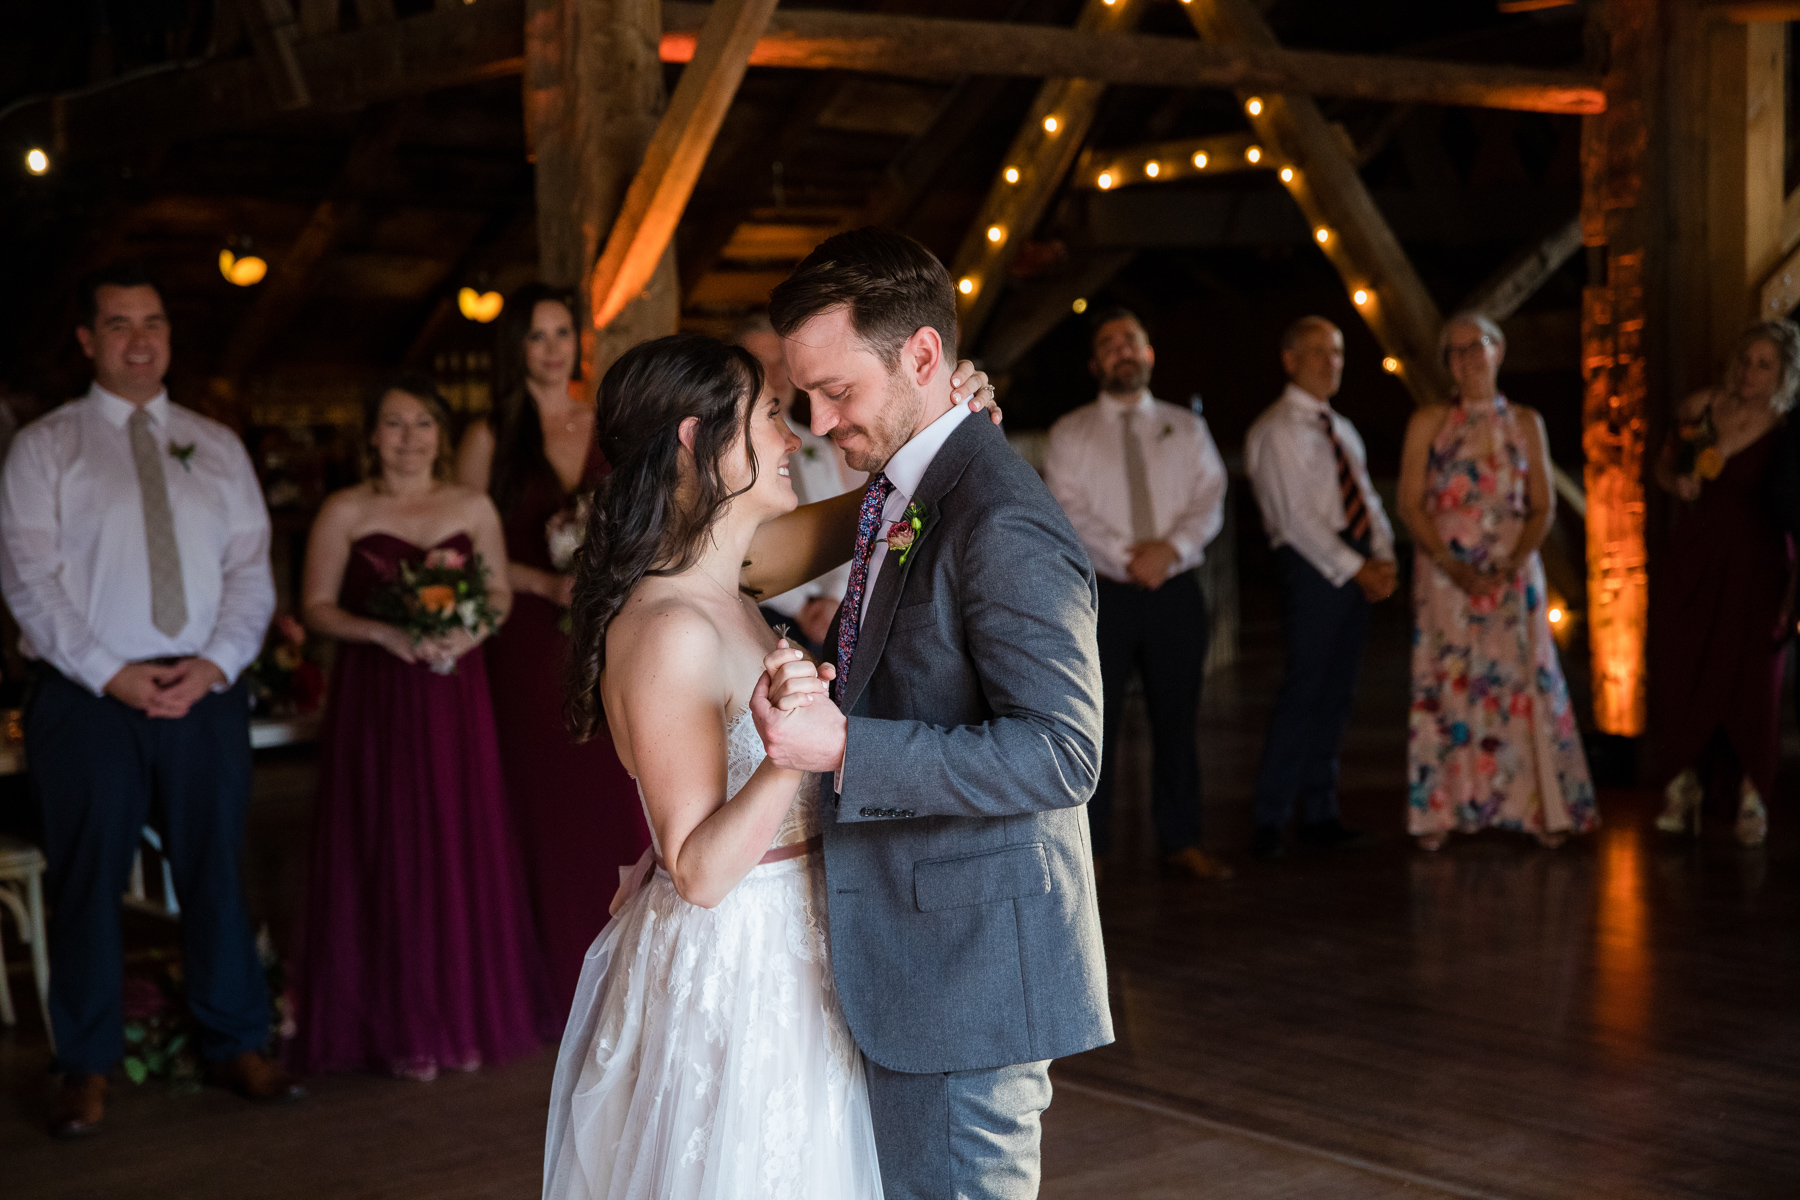 The bride and groom sharing a dance in the renovated barn at Blenheim Hill Farm